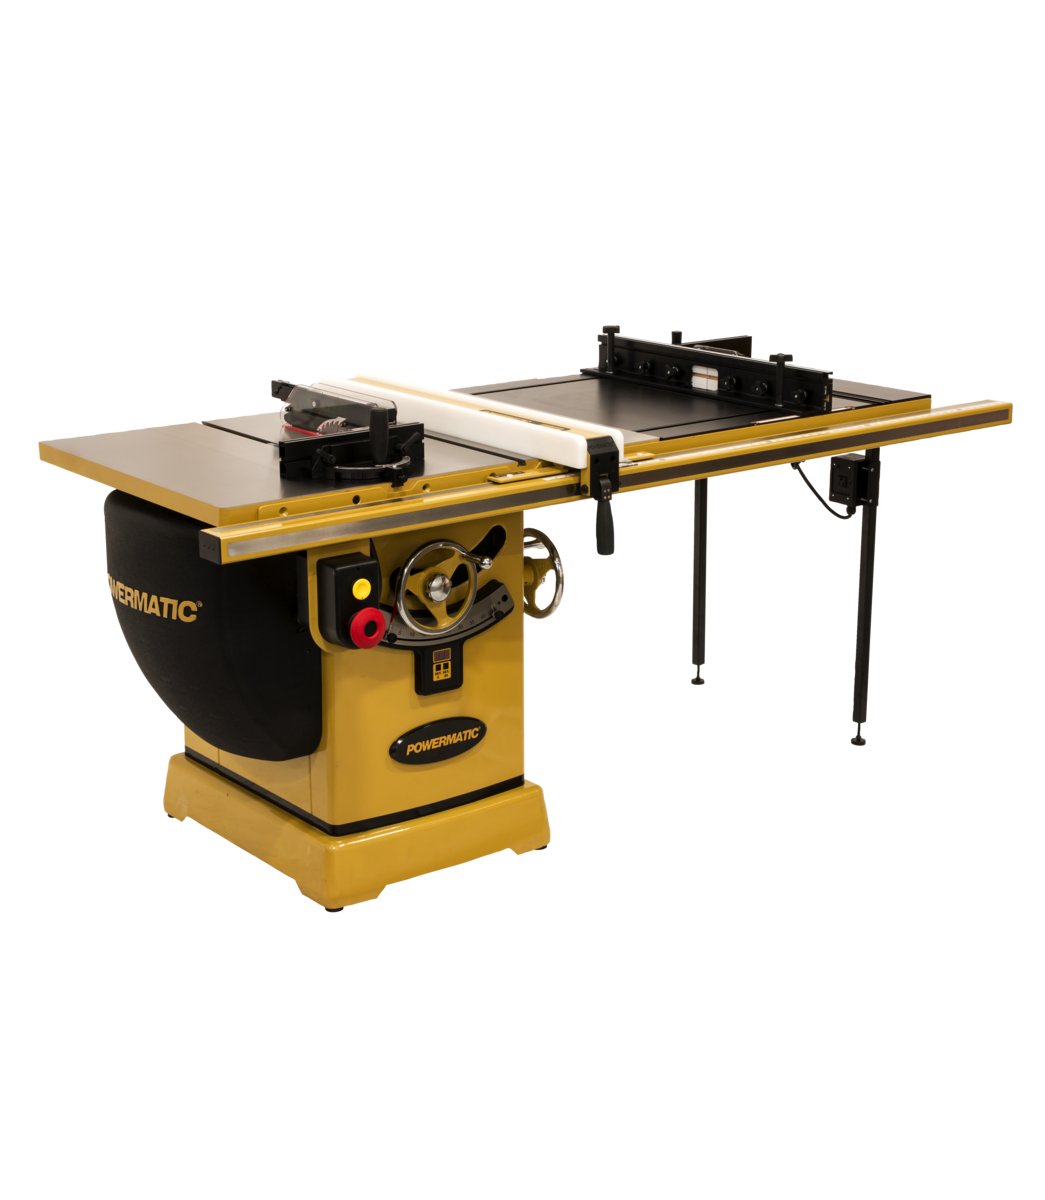 2000B Table Saw - 5HP 3PH 230/460V 50" RIP w/Accu-Fence & Router Lift - Diamond Tool Store